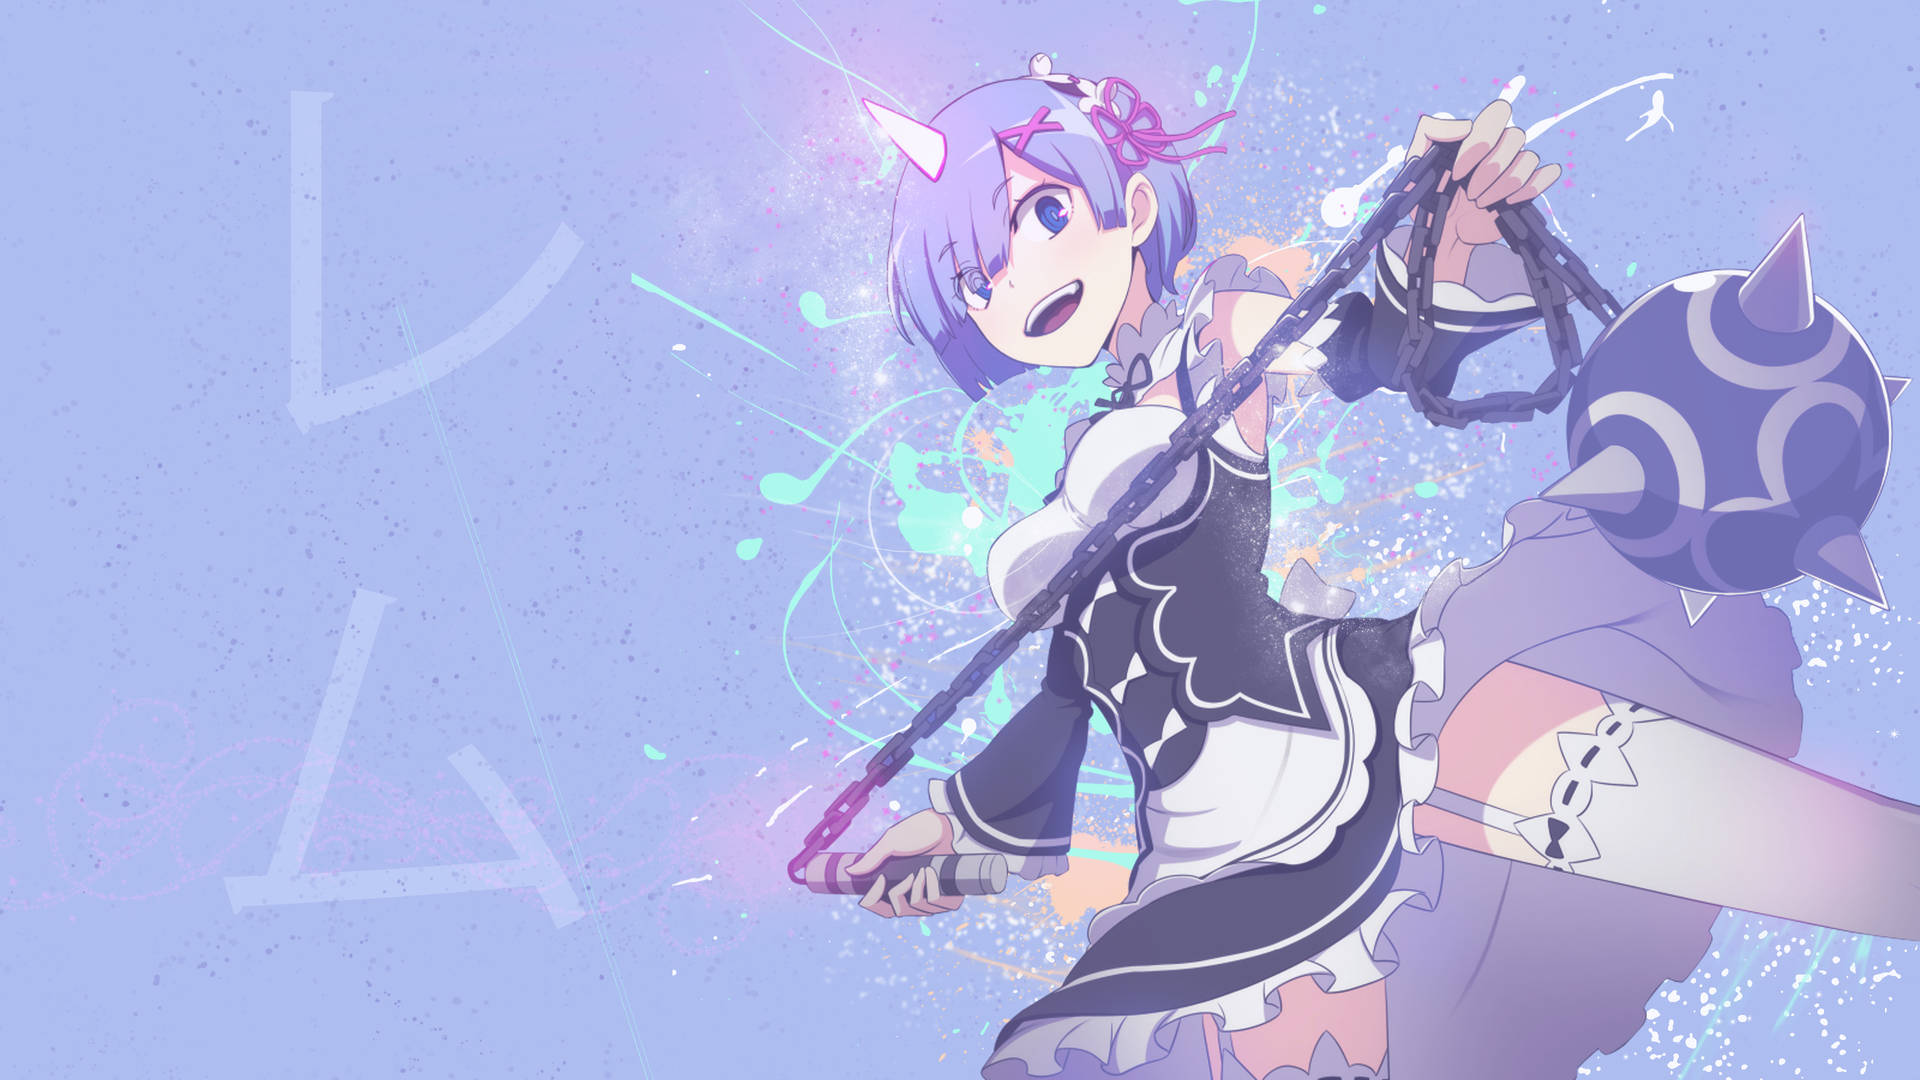 Take a journey with Rem from Re Zero! Wallpaper